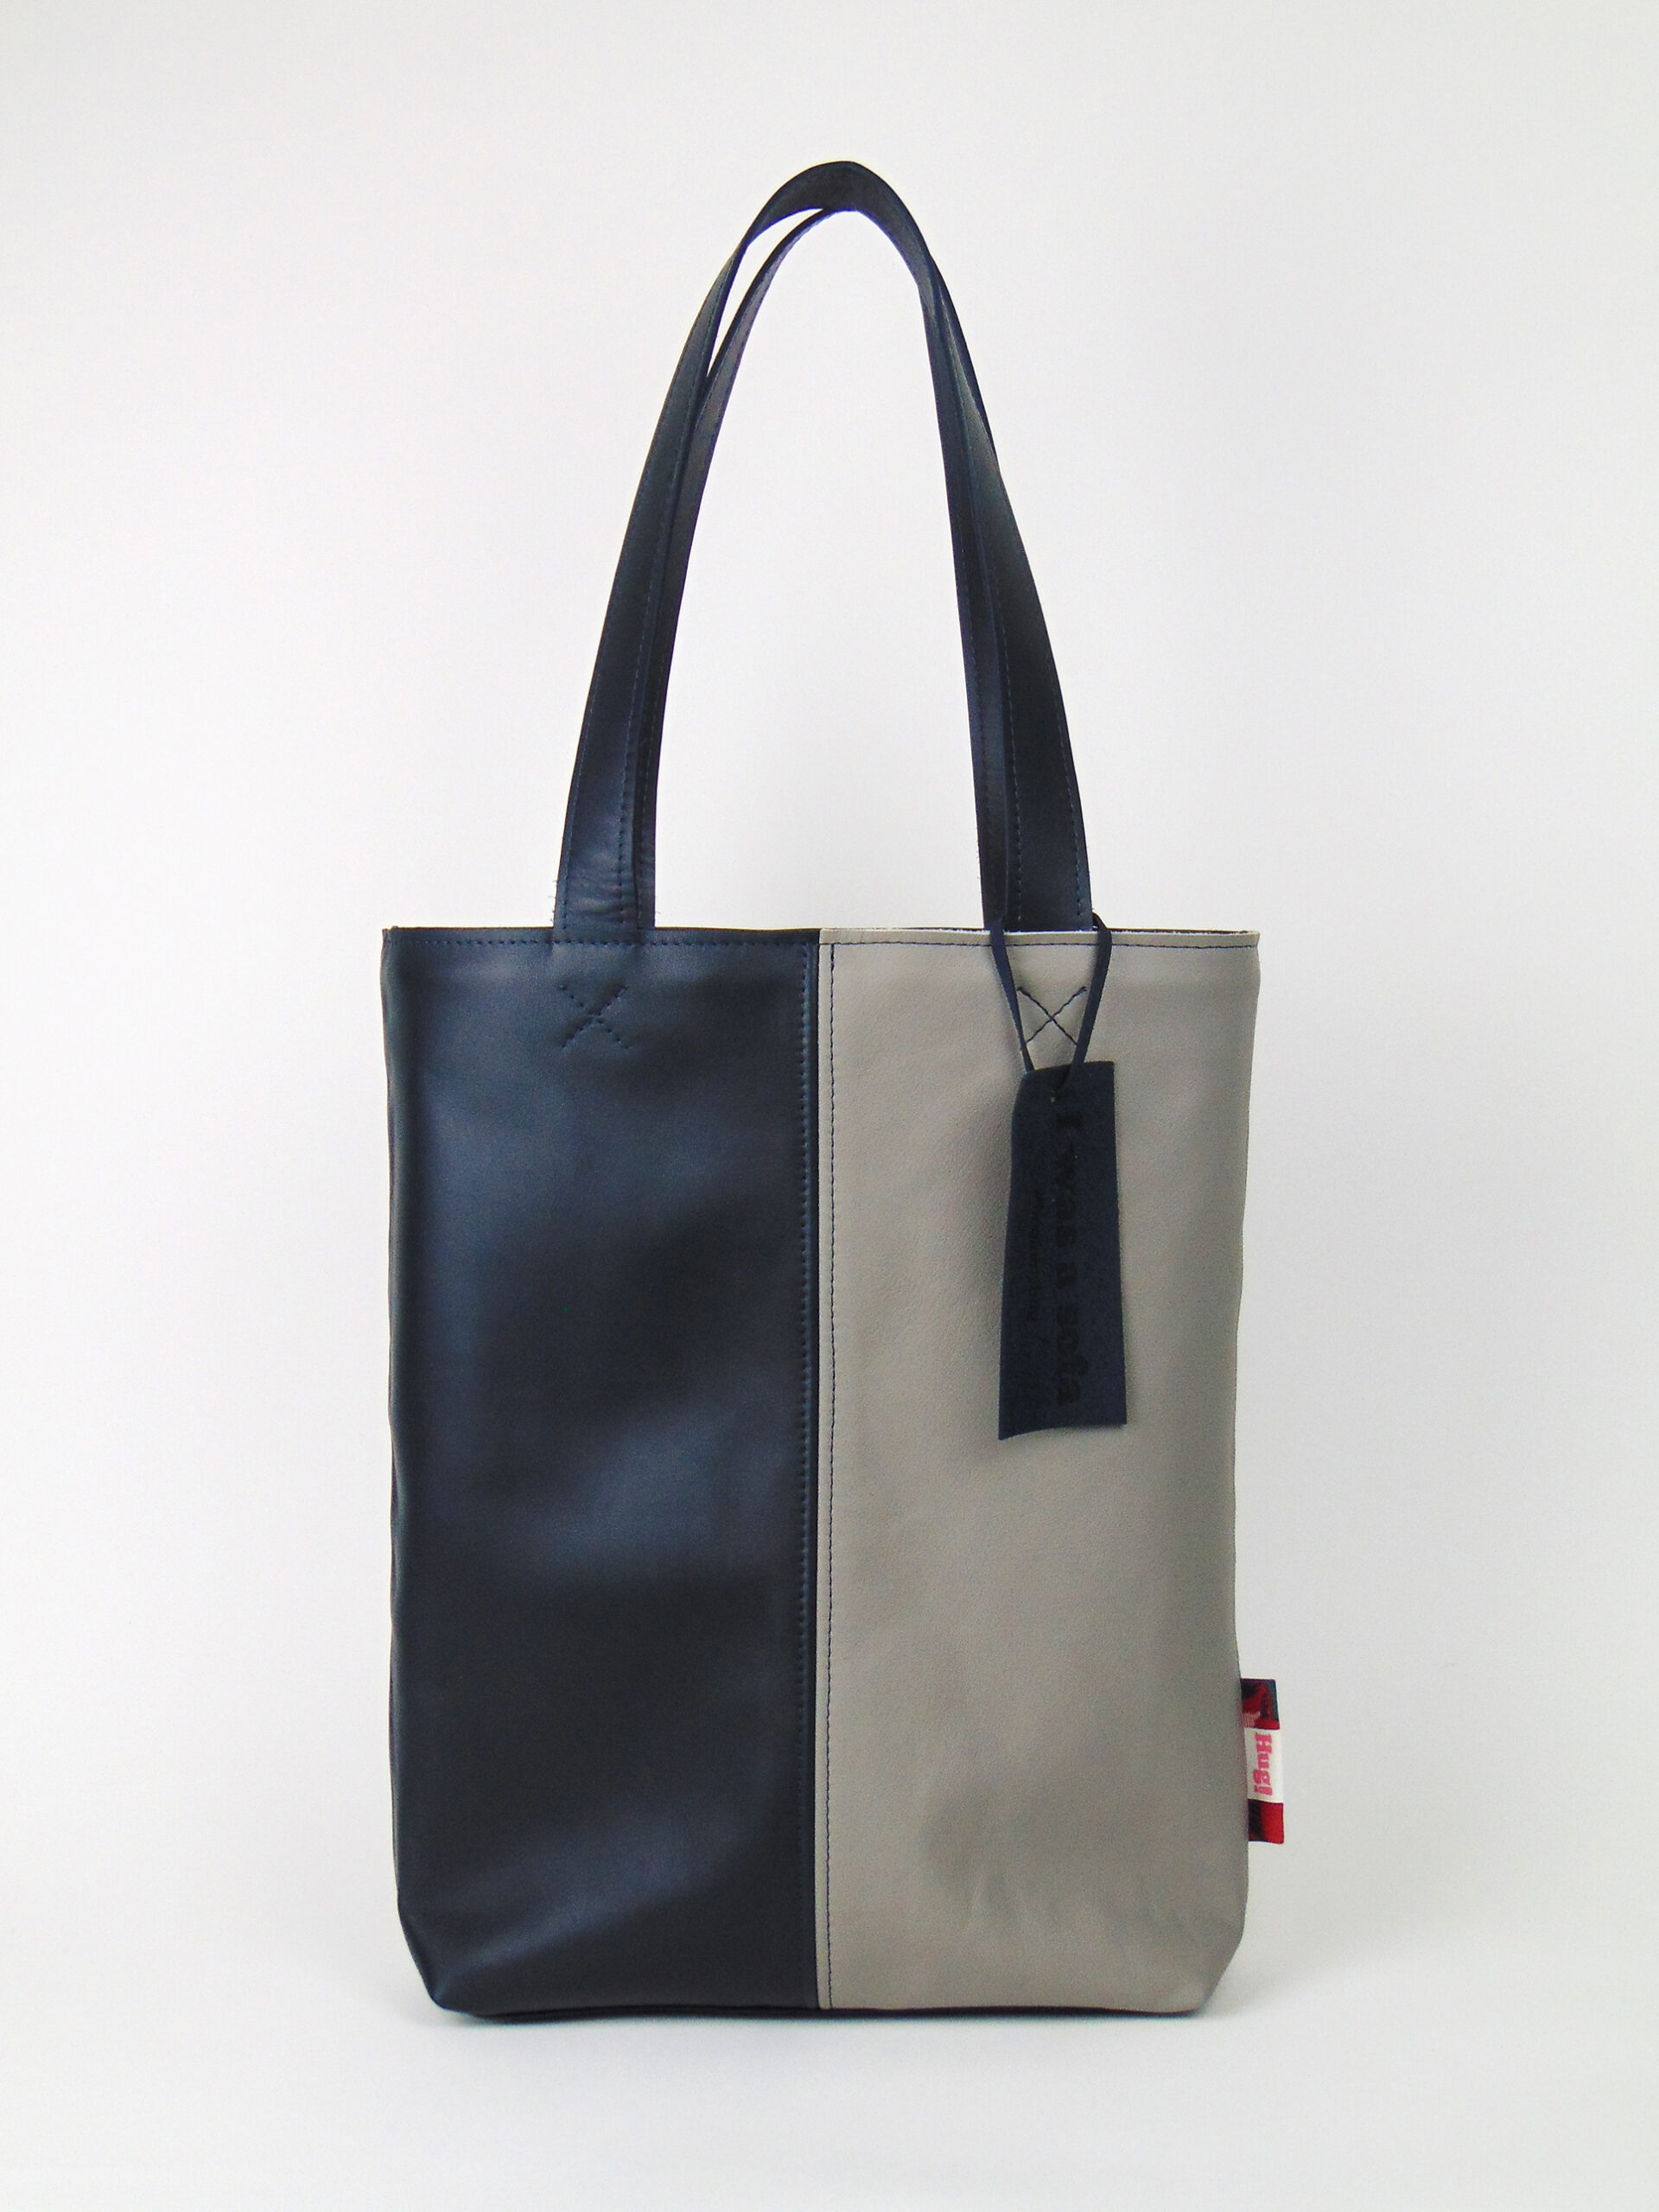 Product image of the shopper named Dust Bunny. This shopper is made from recycled leather in a colour combination of blue and grey.